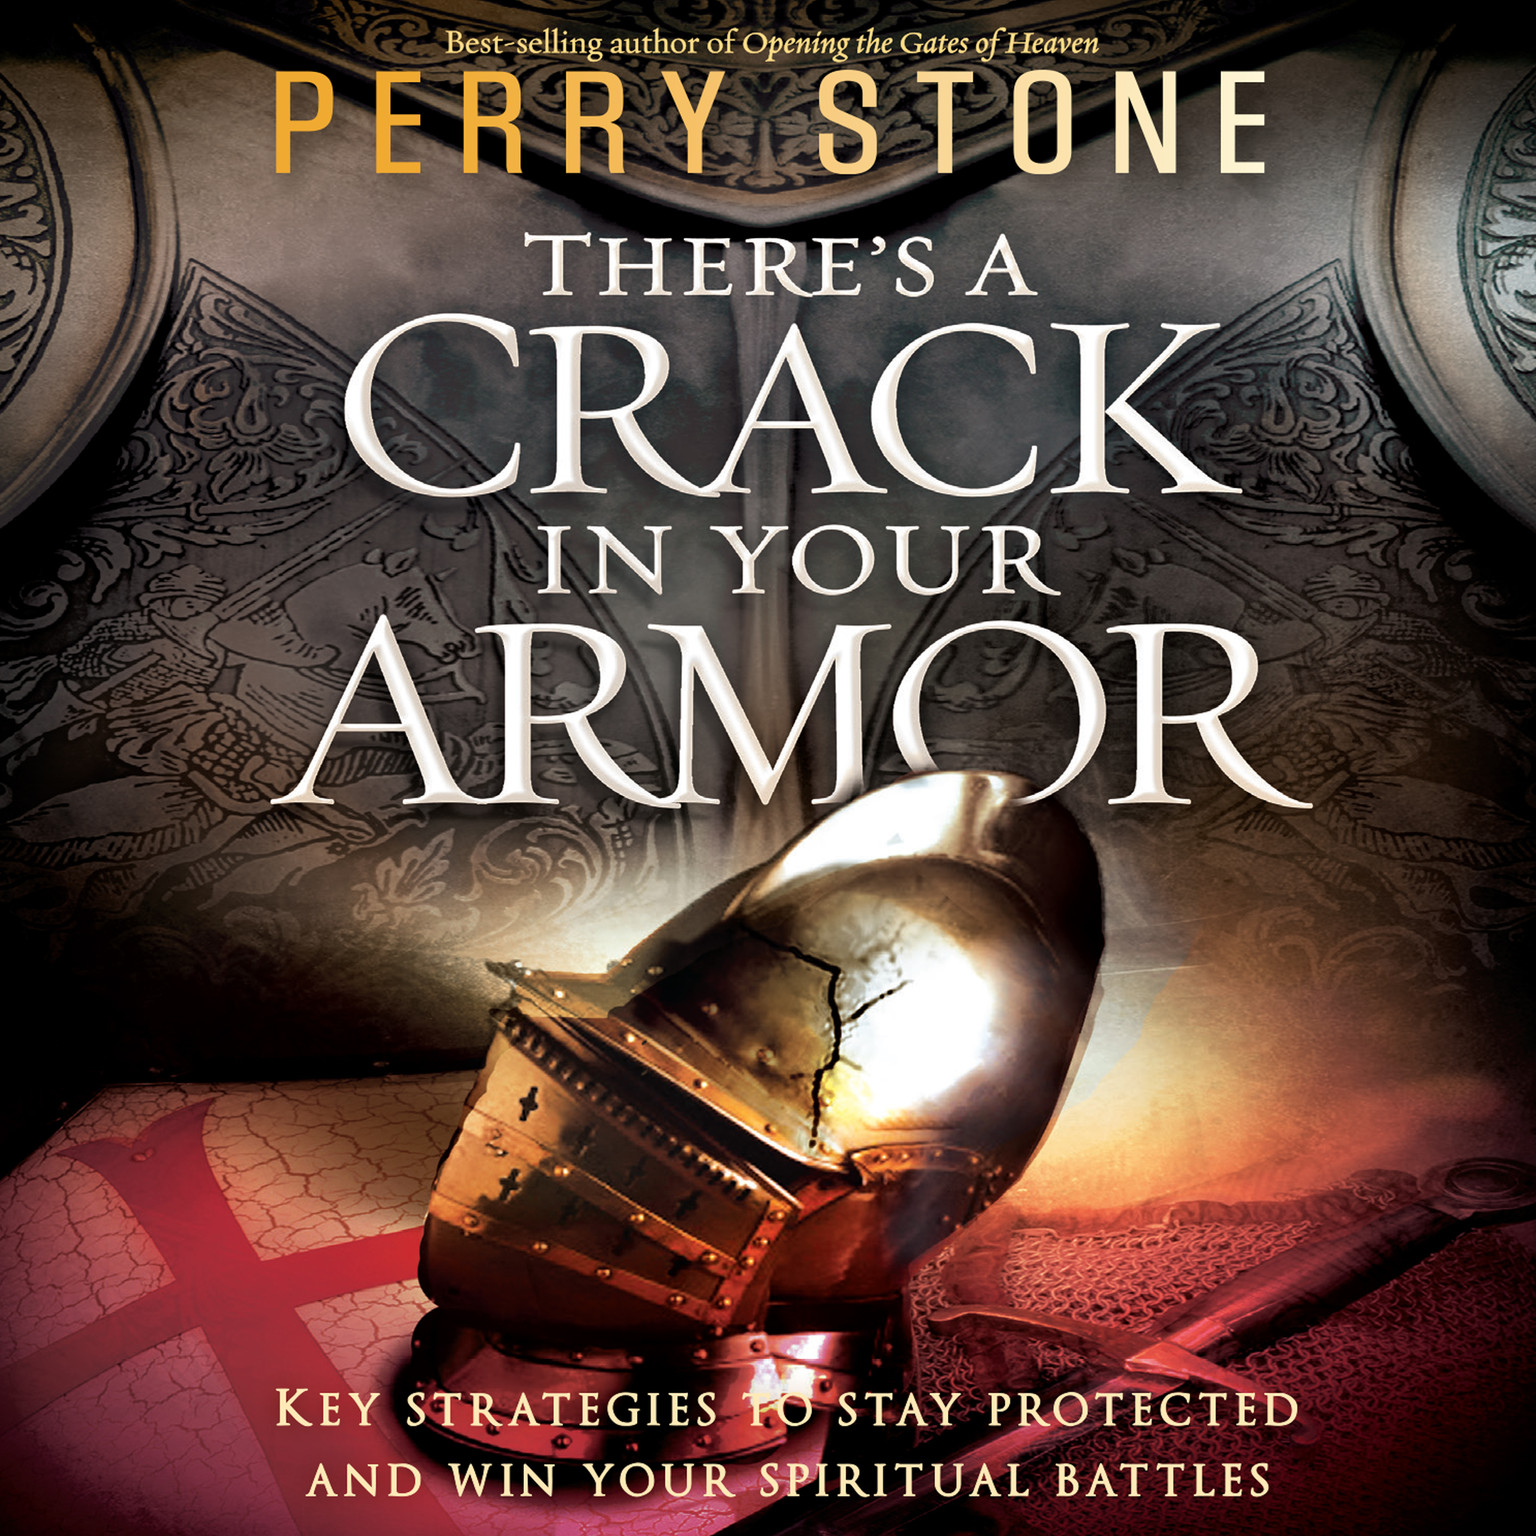 Theres a Crack in Your Armor: Key Strategies to Stay Protected and Win Your Spiritual Battles Audiobook, by Perry Stone